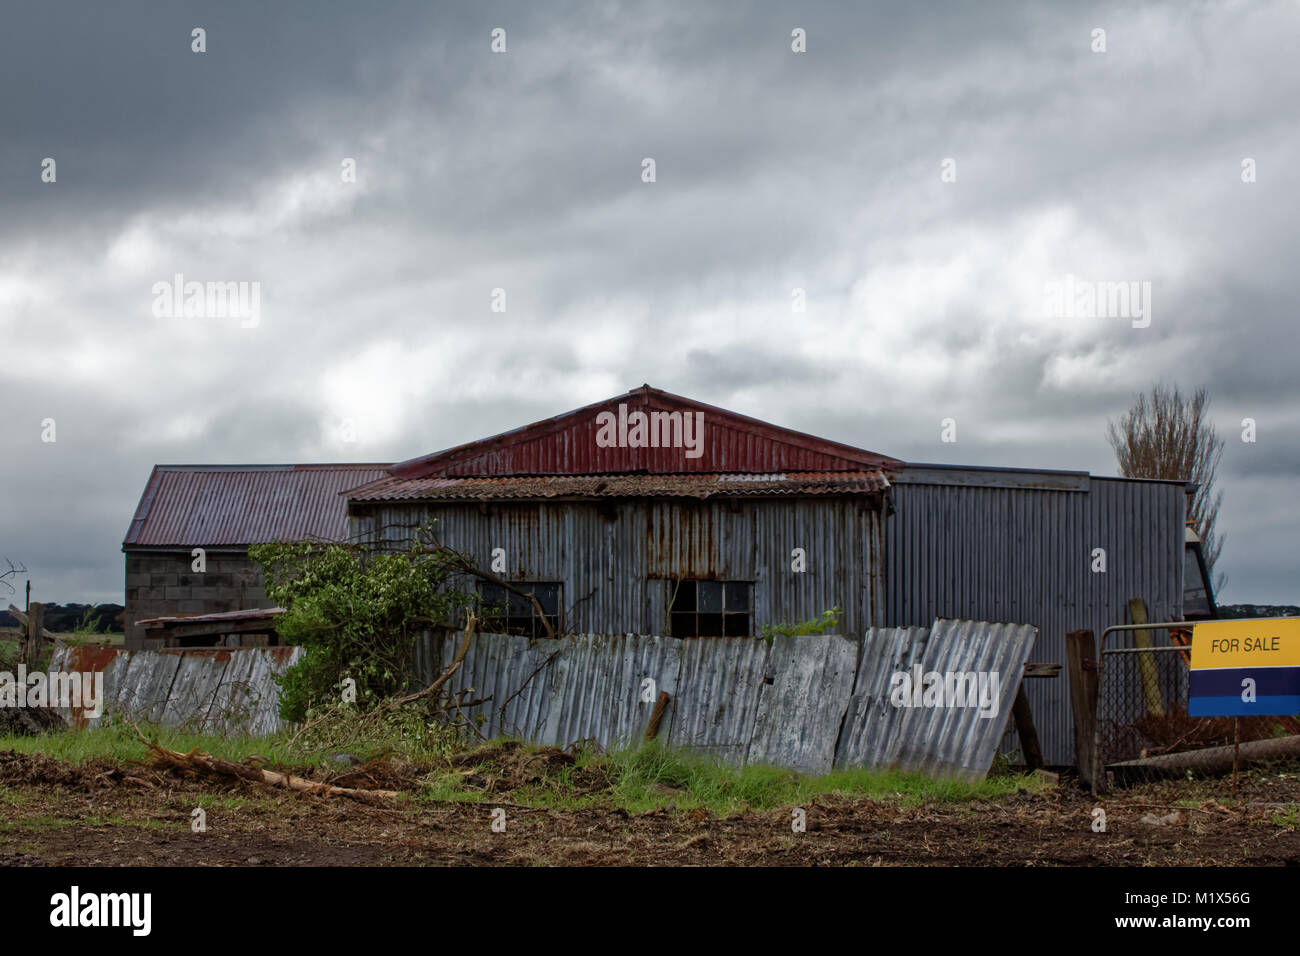 Rustic tin shed in the Australian farming district with FOR SALE sign Stock Photo